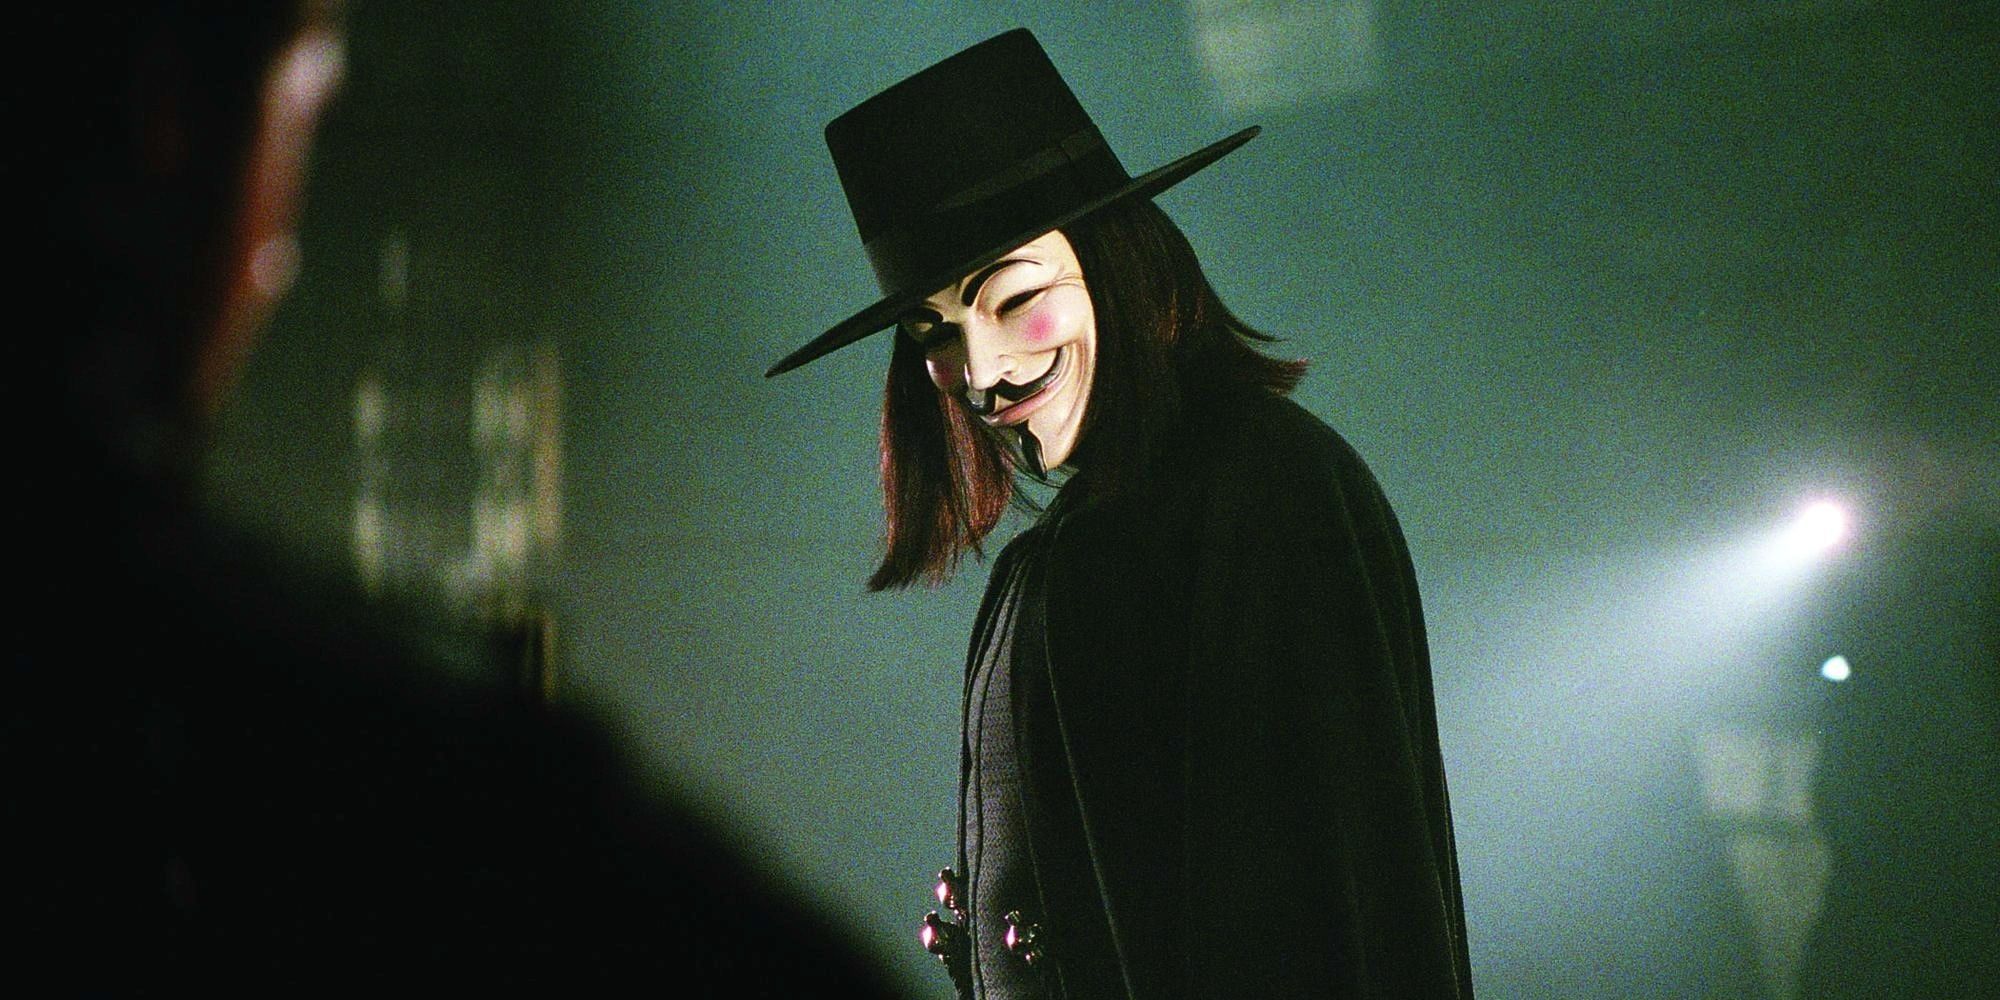 A man wearing a Guy Fawkes mask, a black hat, and a black cape stands surrounded by armed me.